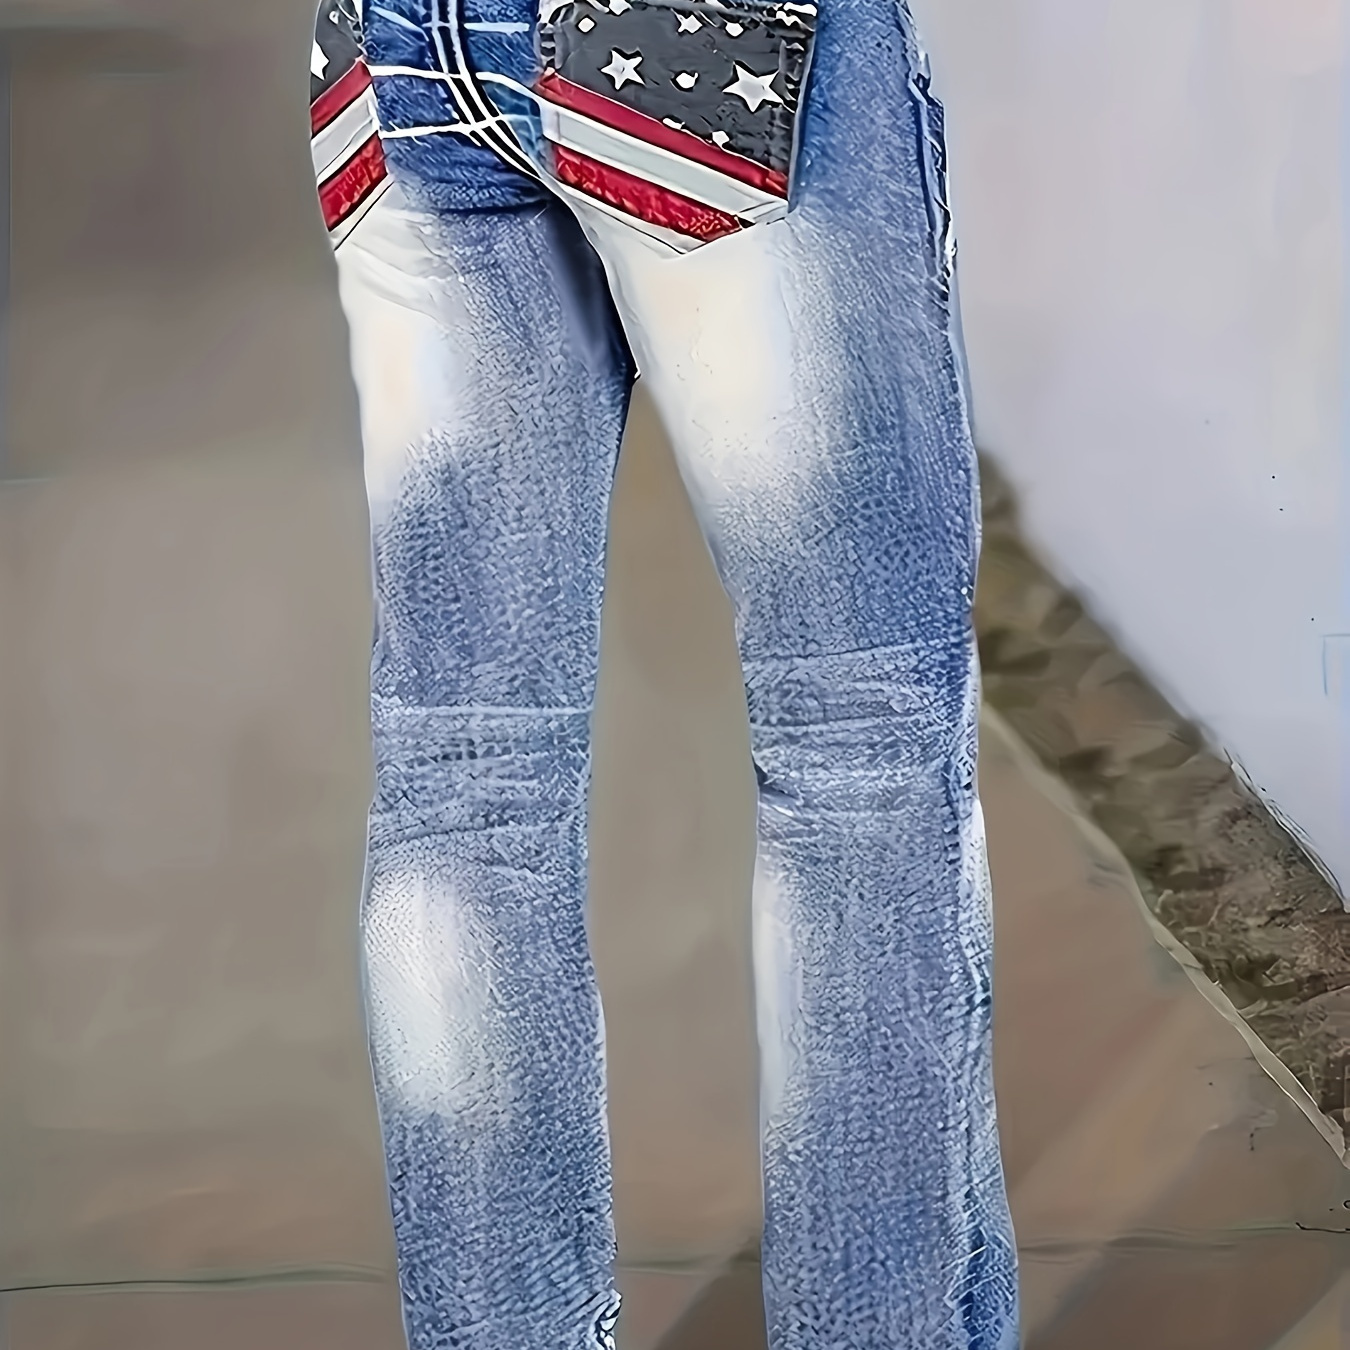 

Women's Fashion Patriotic American Flag Print Independence Day Outfit 4th Of July Straight-leg Denim Jeans, Casual Style, Versatile Blue Jean Pants For Everyday Wear - Perfect For Fall & Winter